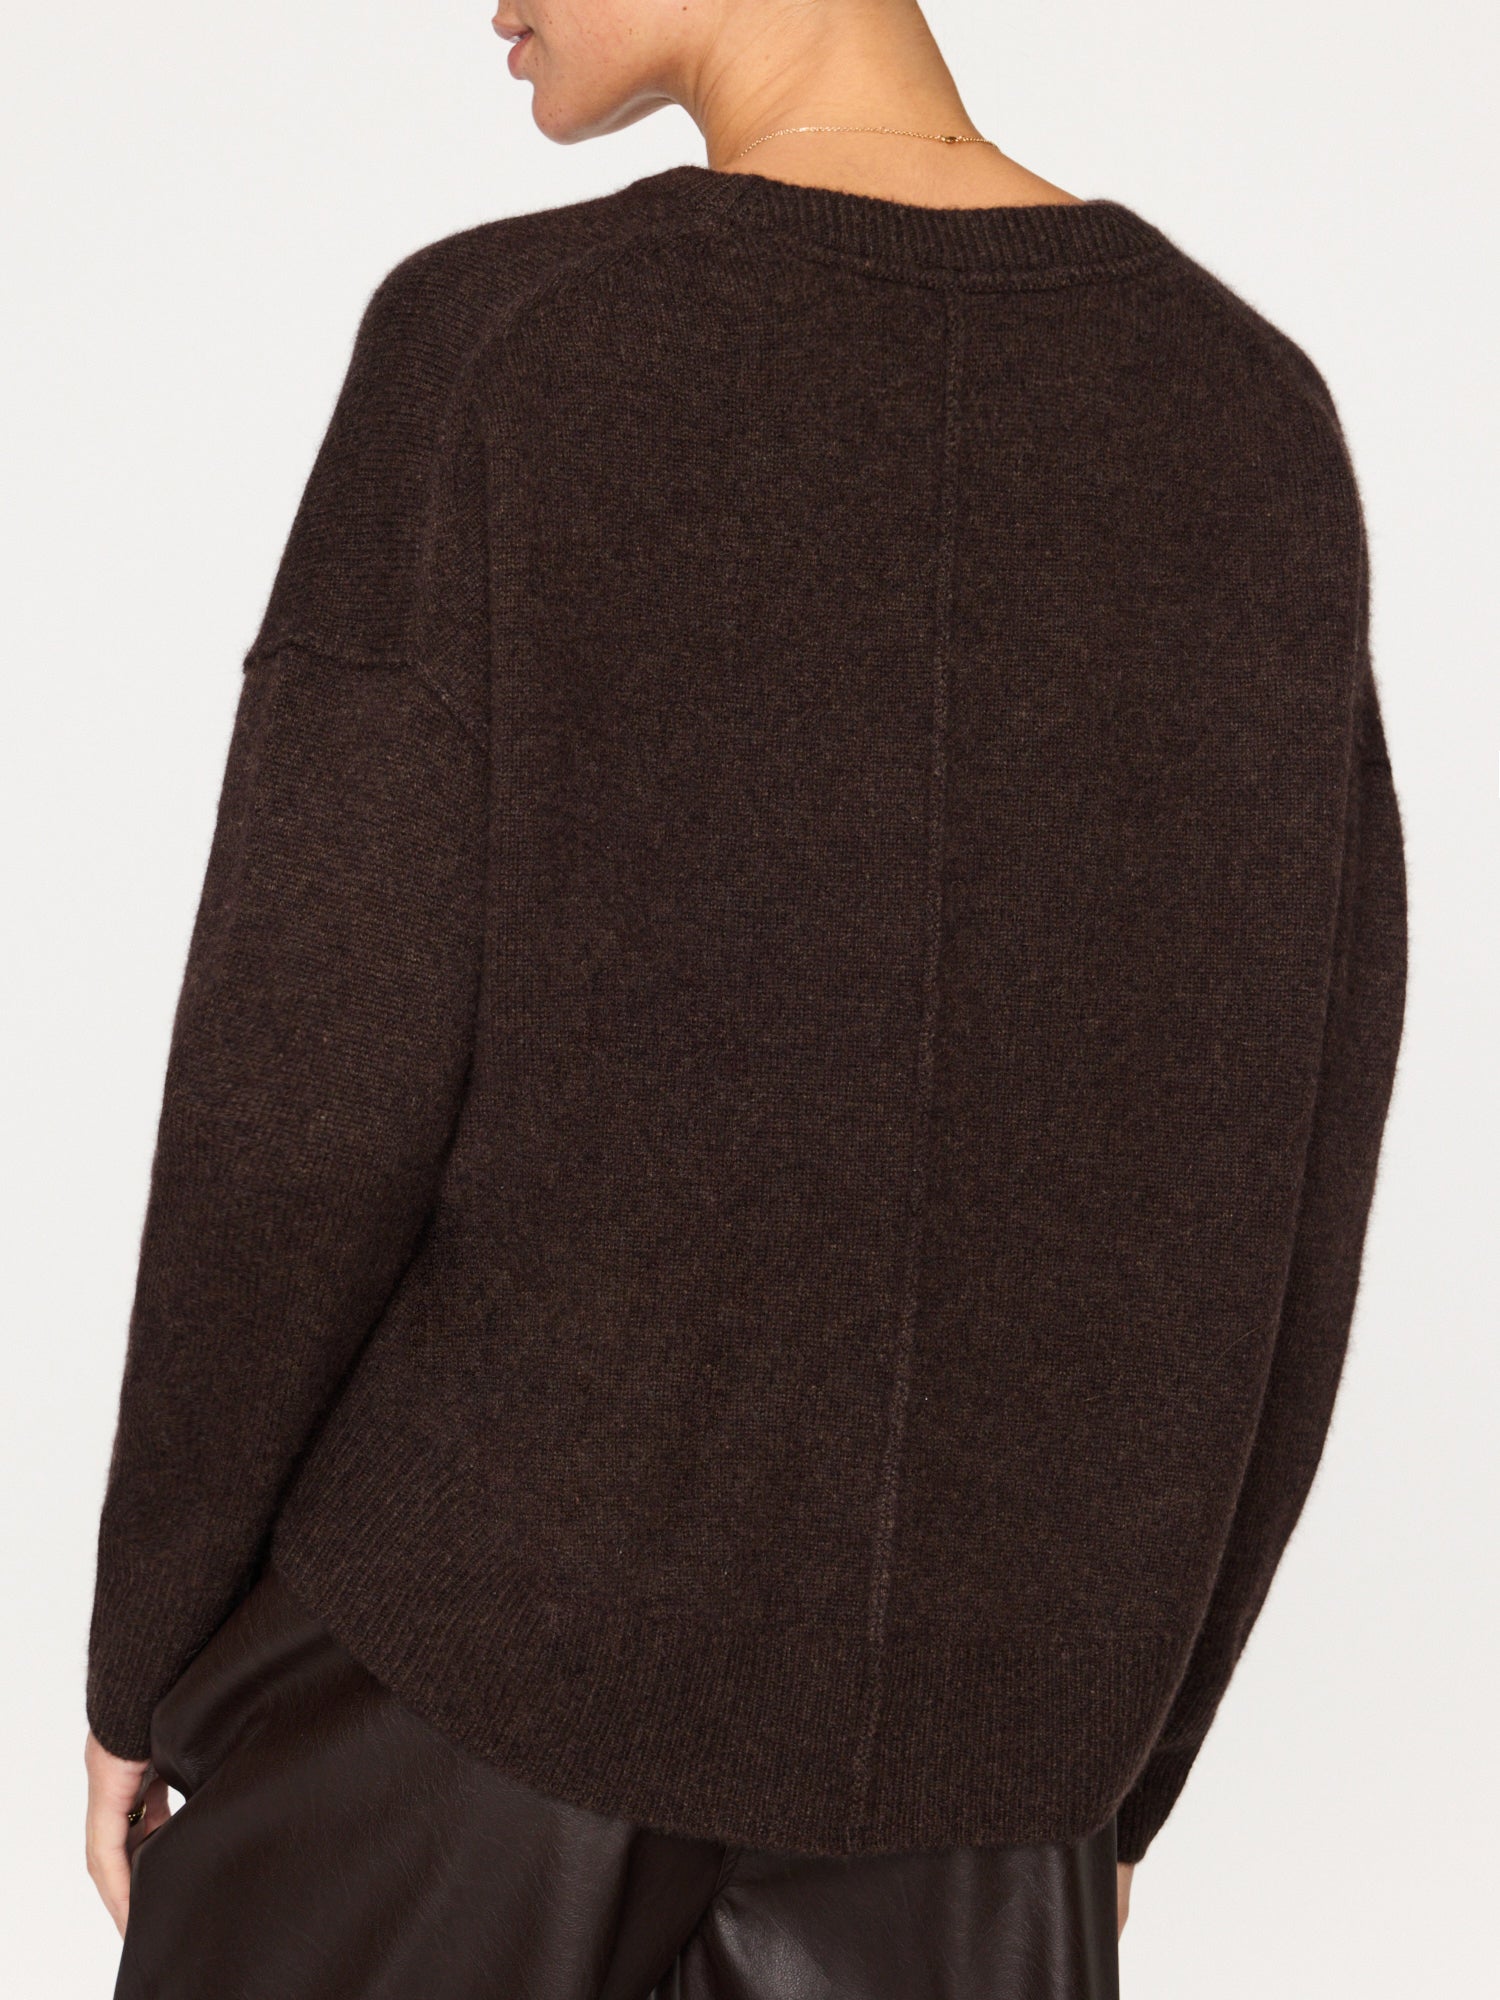 Everyday cashmere crewneck brown sweater back view 2